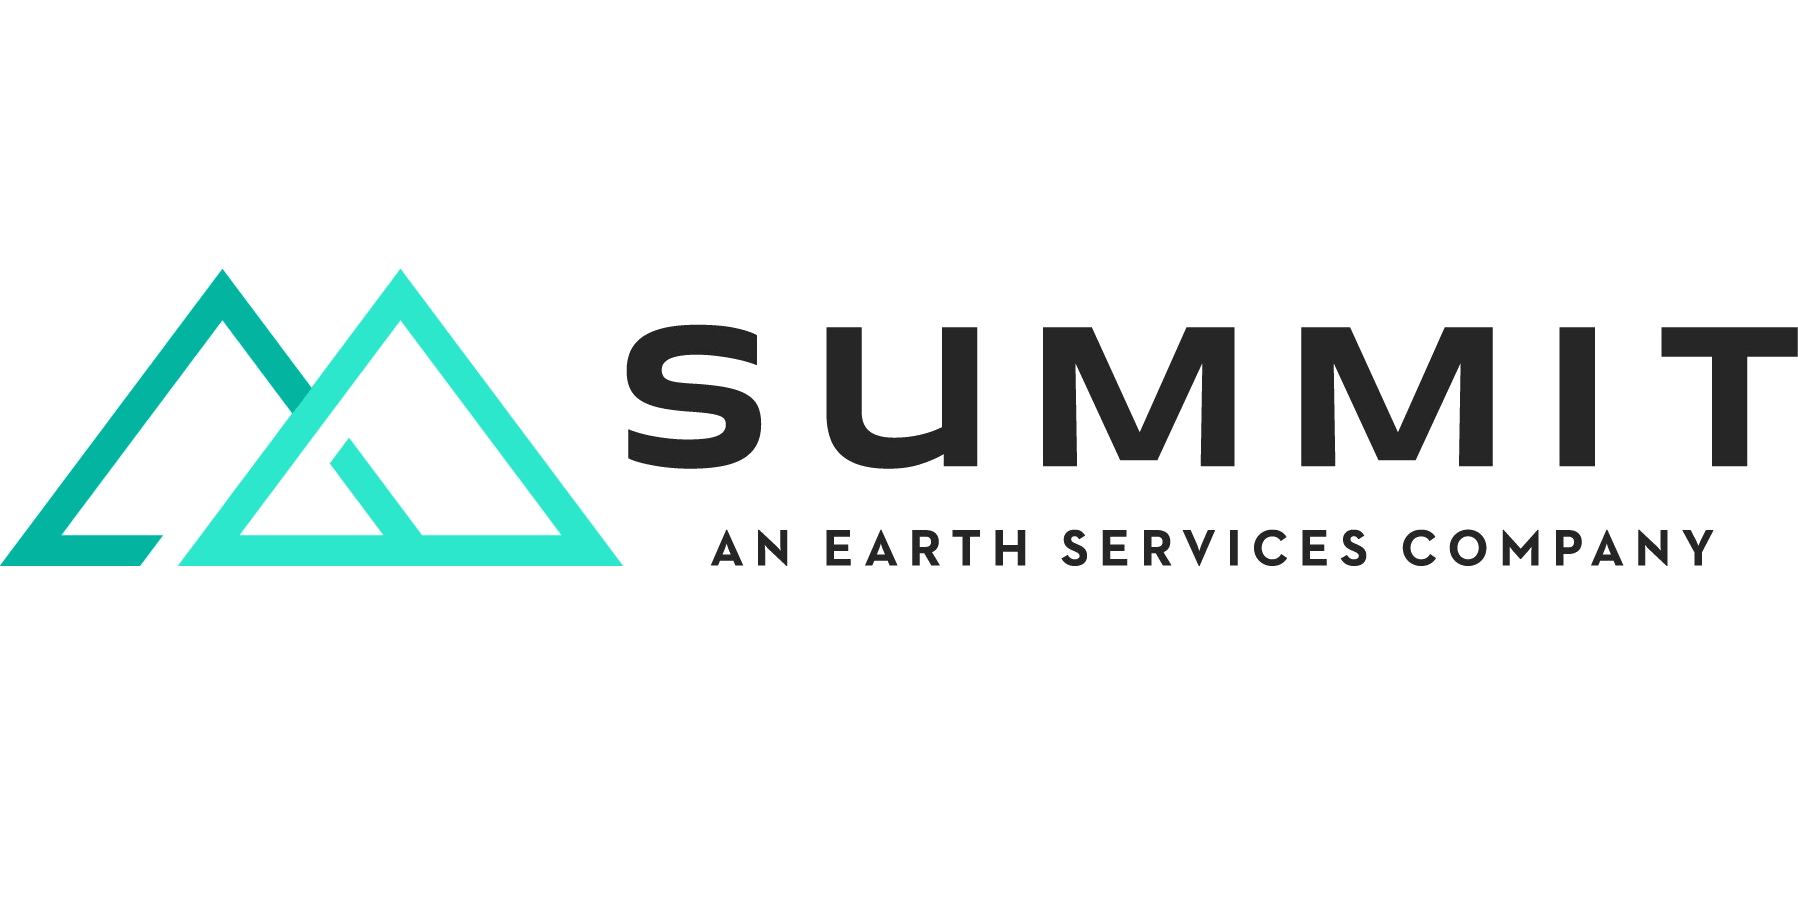  For over 15 years, Summit’s professional team of environmentally focused engineers, geologists, biologists, agrologists and technicians have supported sustainable energy development in renewable and conventional sectors. Summit has been conducting s